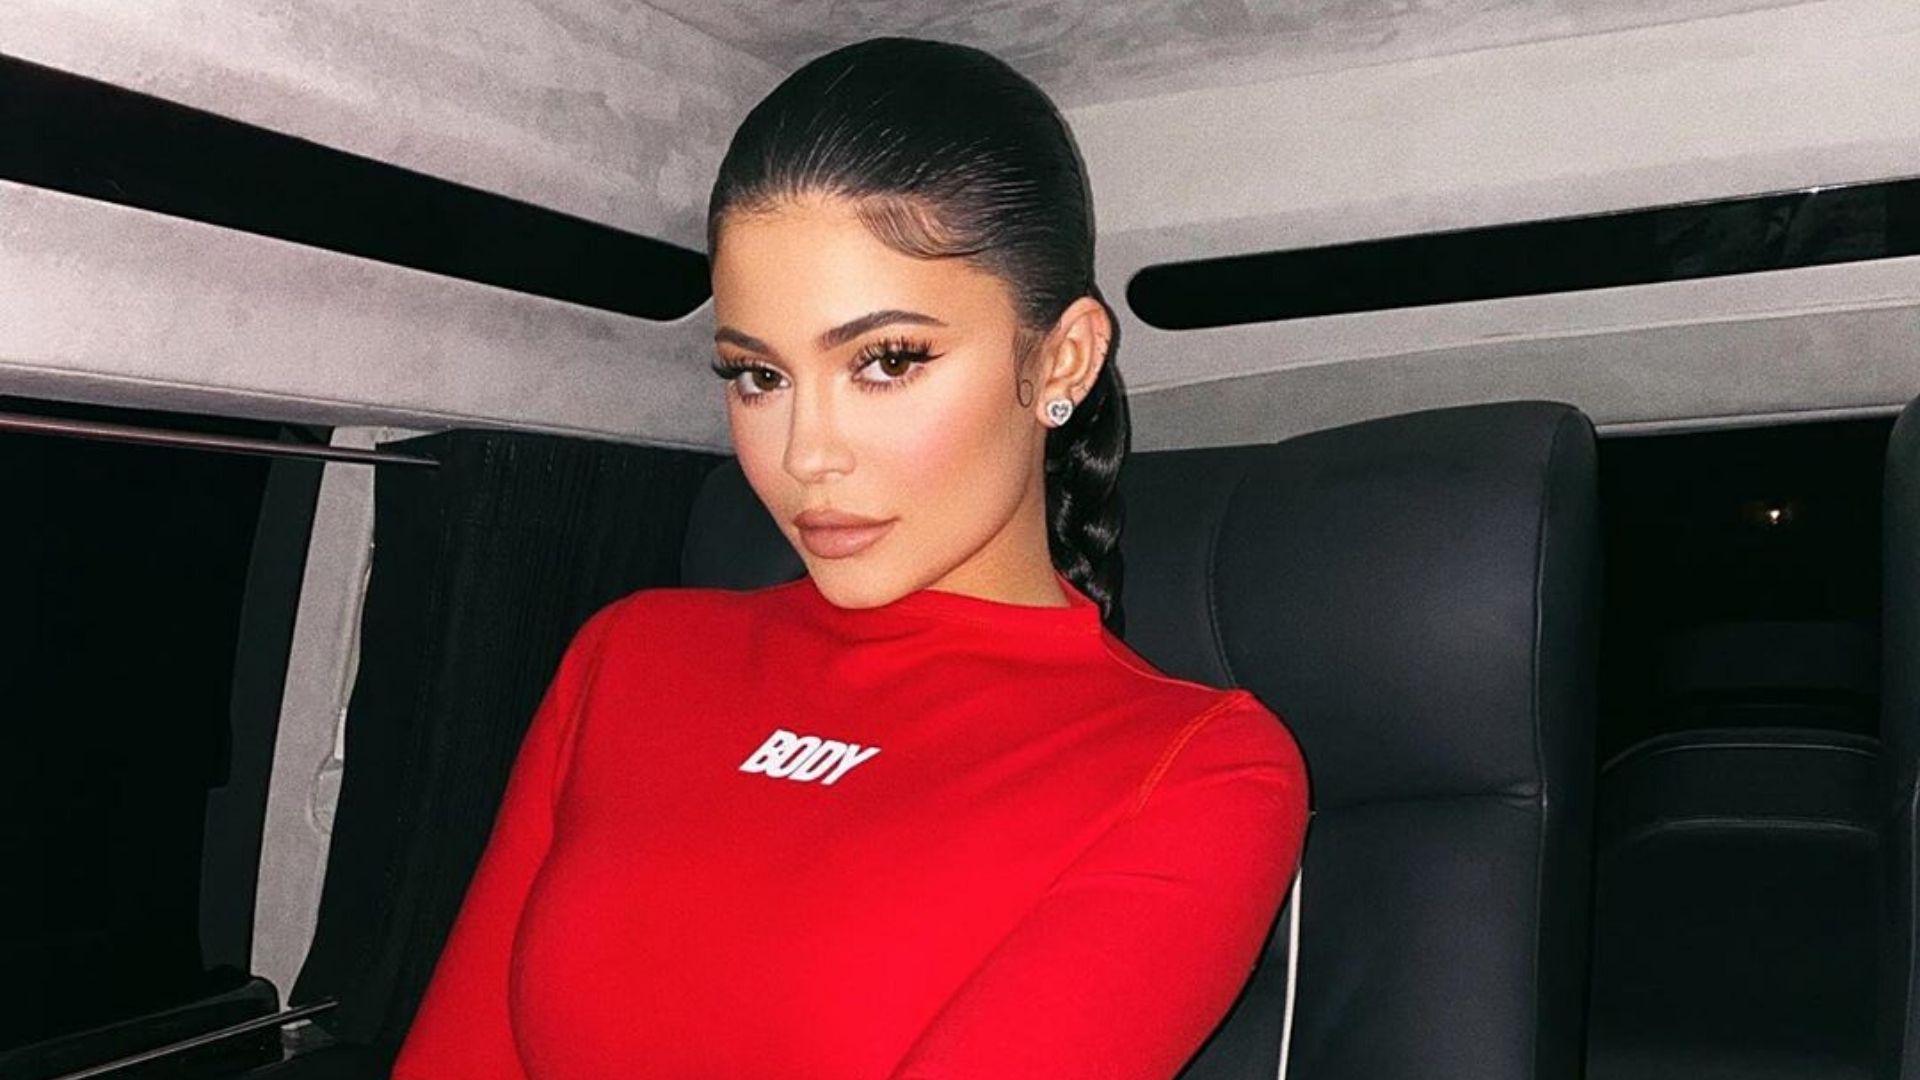 Kylie Jenners Short Hairstyle May Inspire You to Go for the Chop  E  Online